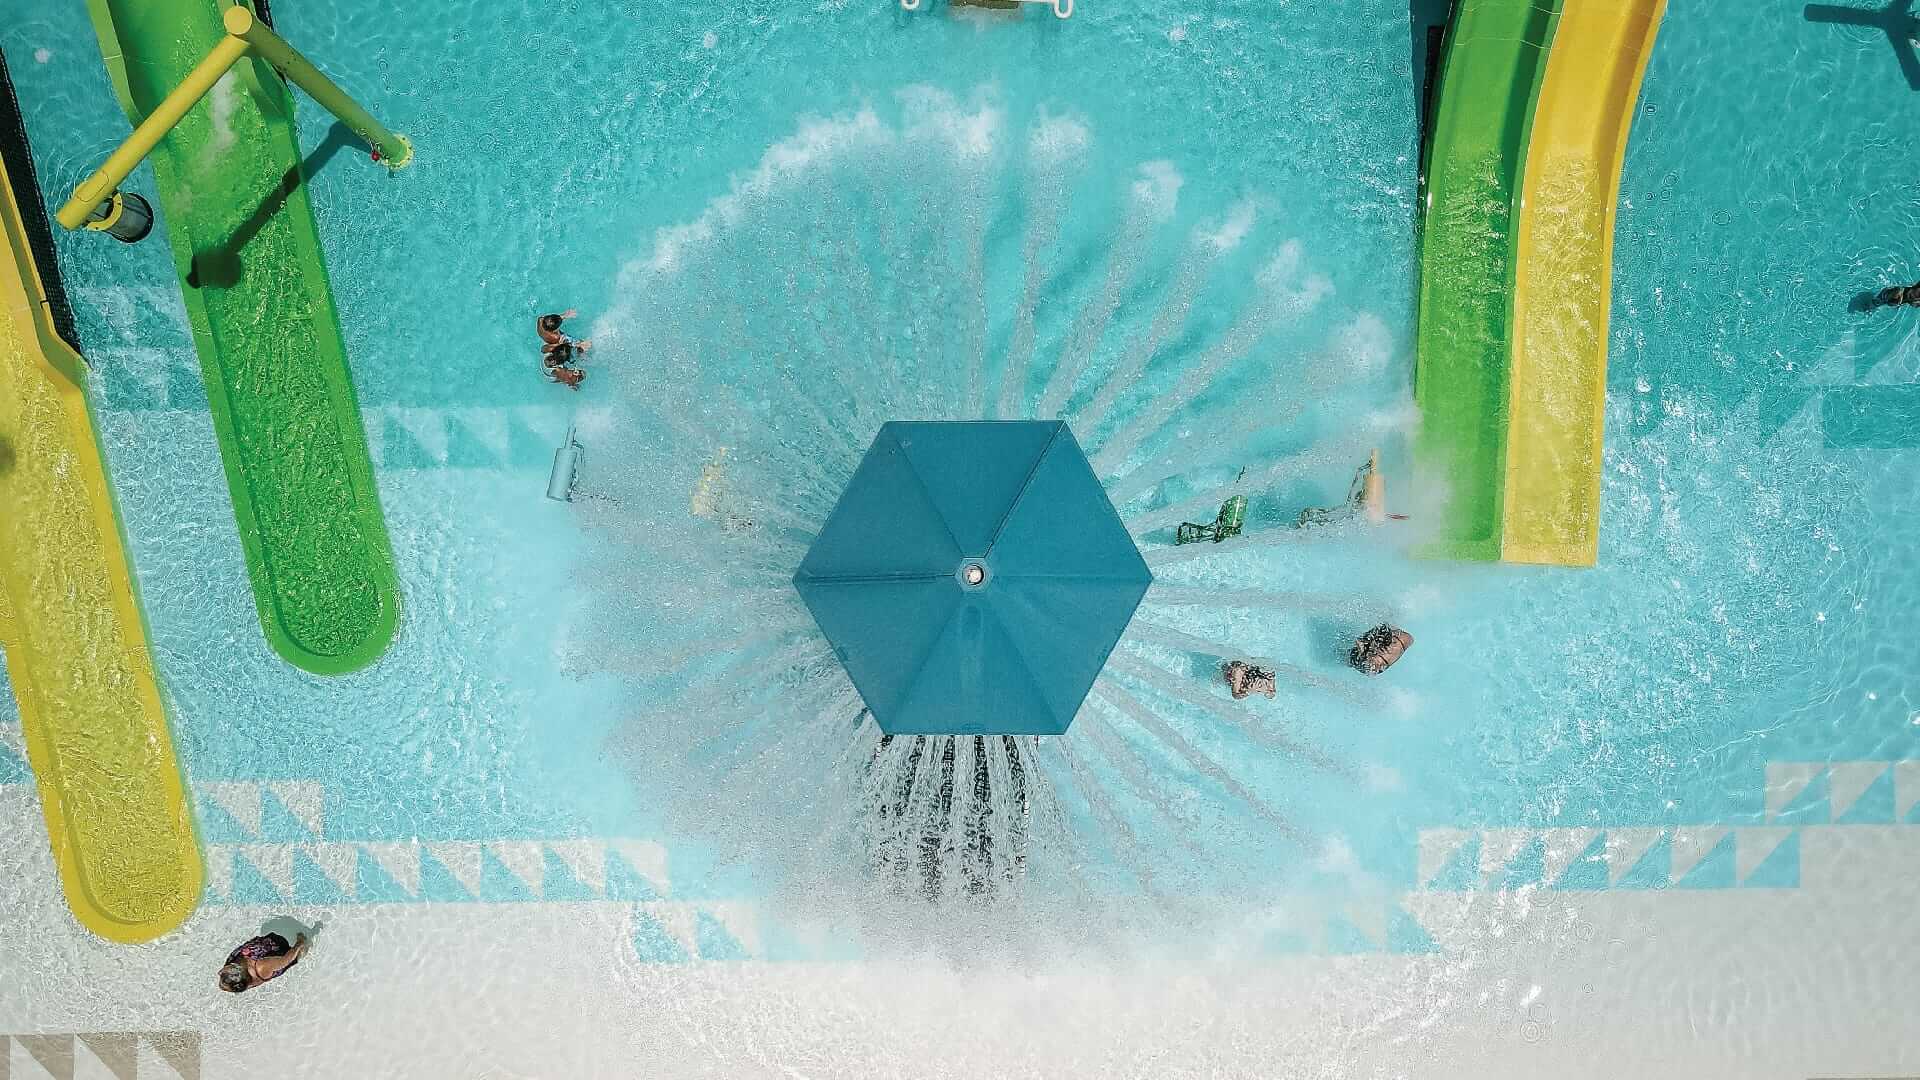 Arial view of the Power Plunge at the Camp Margaritaville RV Resort releasing its 360-degree water spray onto water players below.